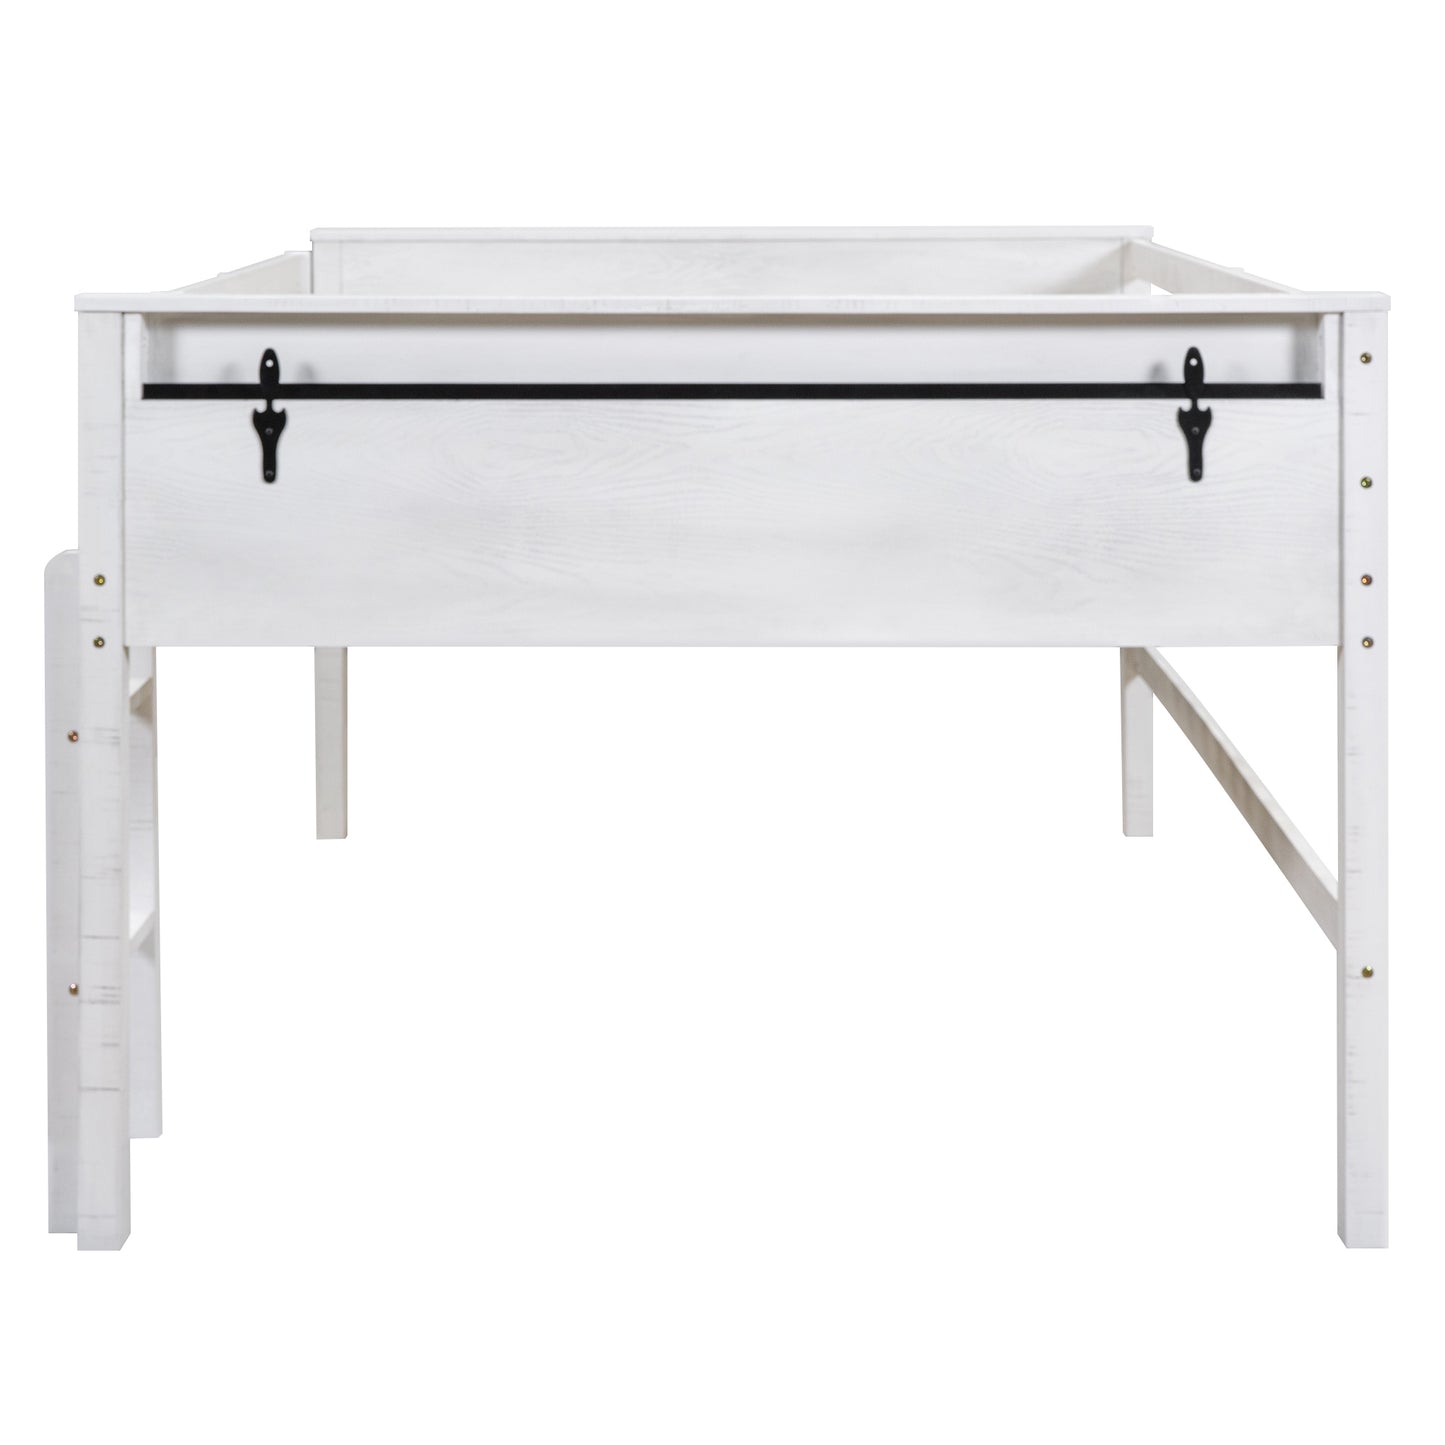 Wood Full Size Loft Bed with Hanging Clothes Racks, White